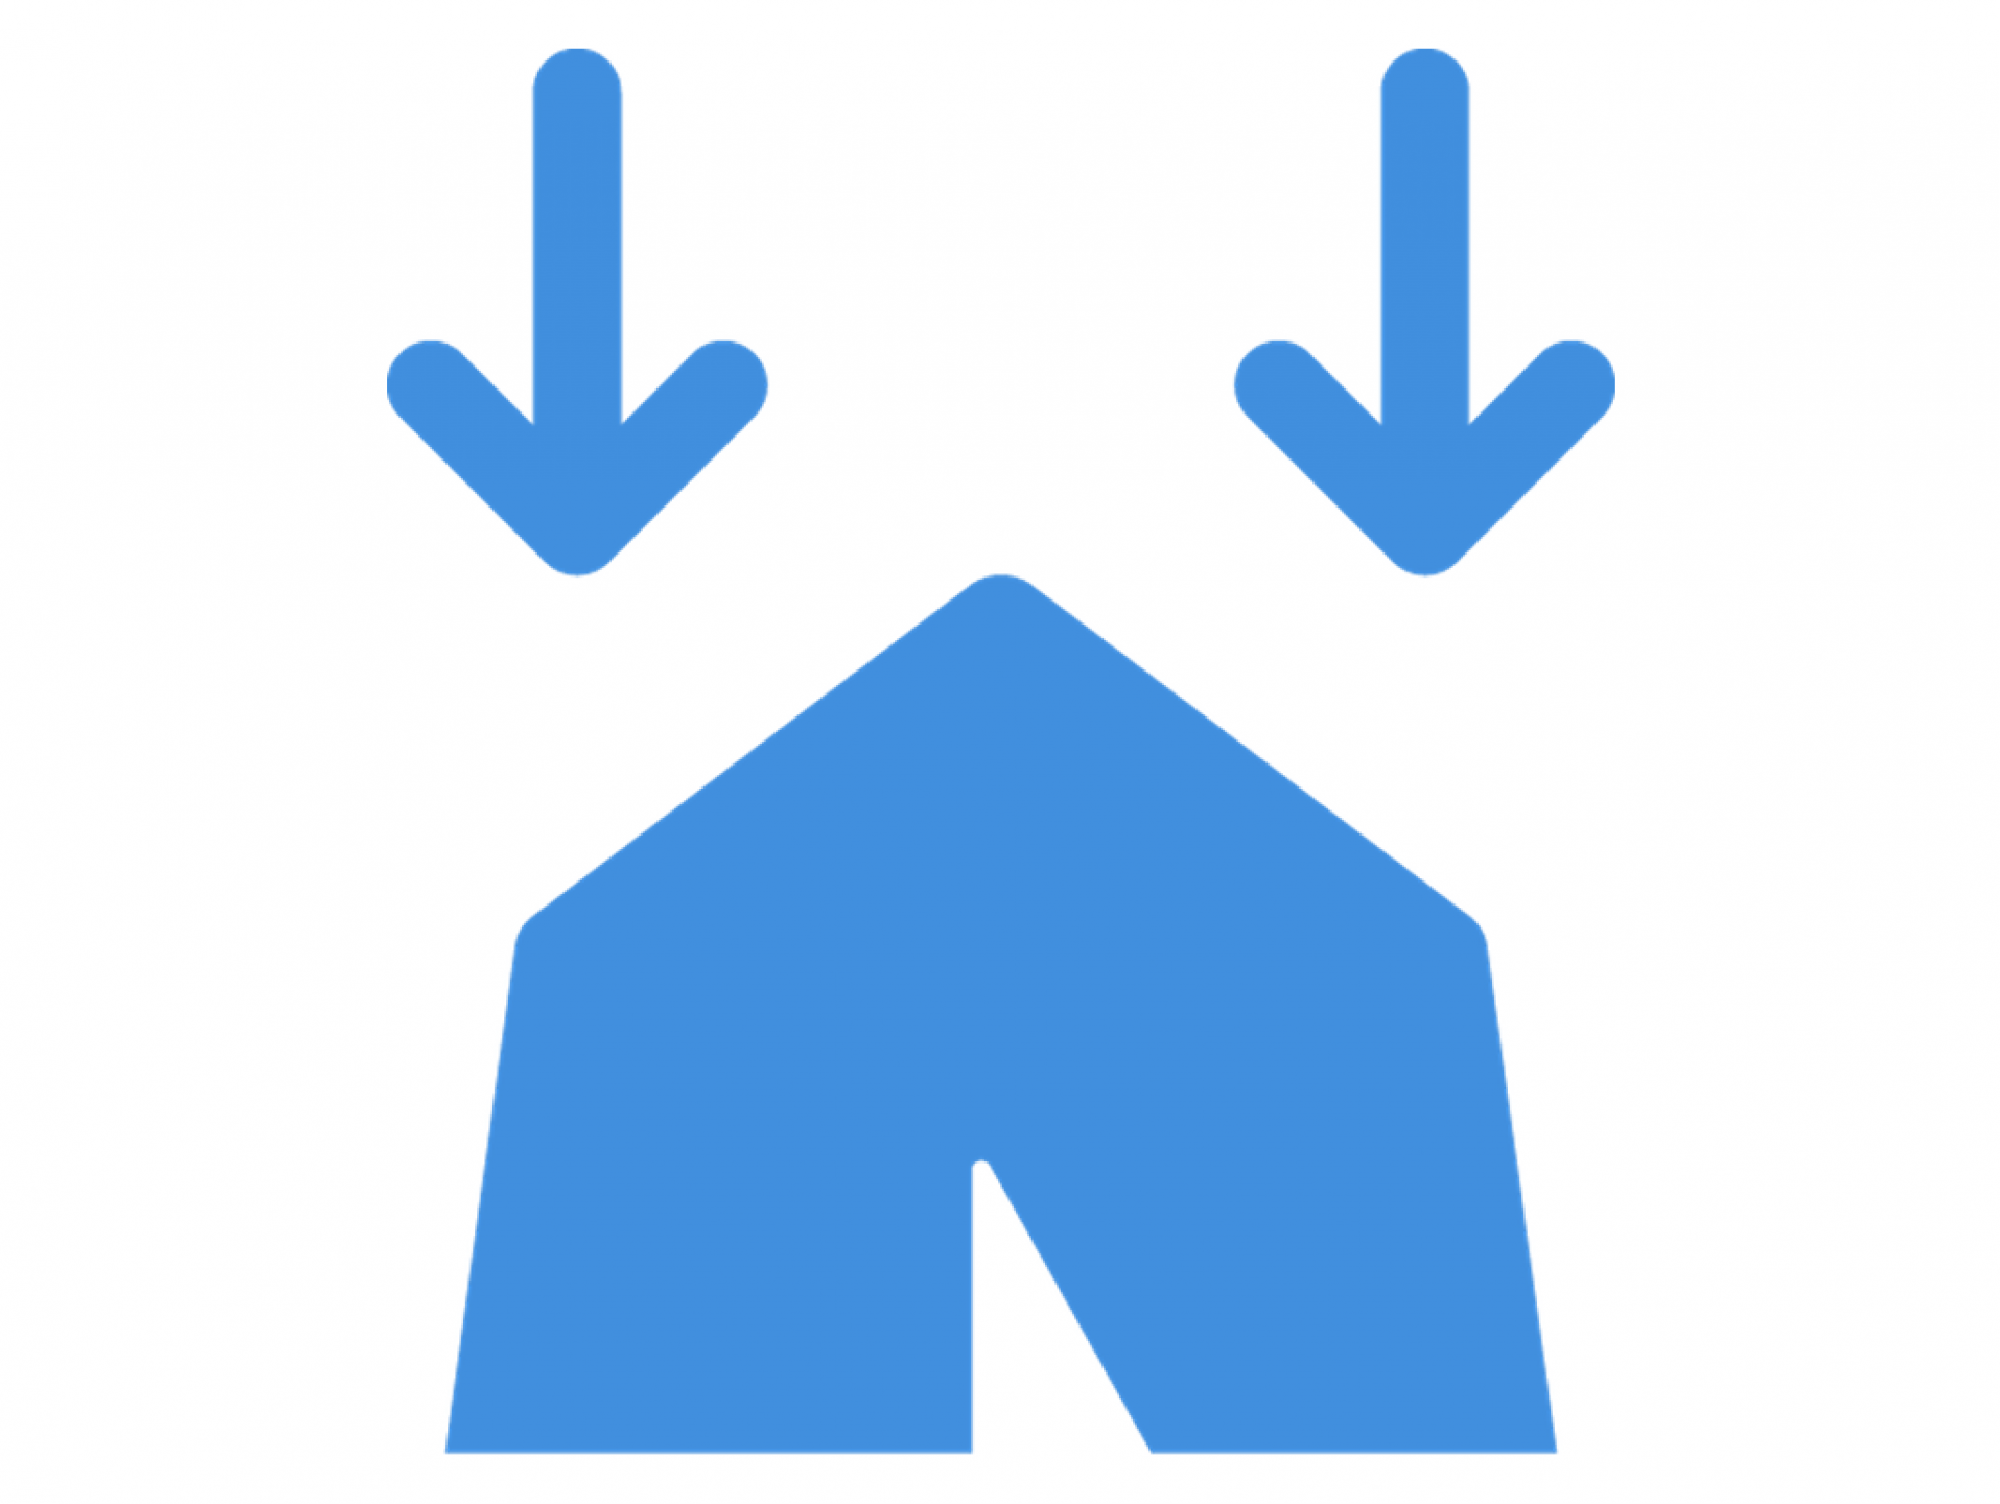 Icon for storing or maintaining aid